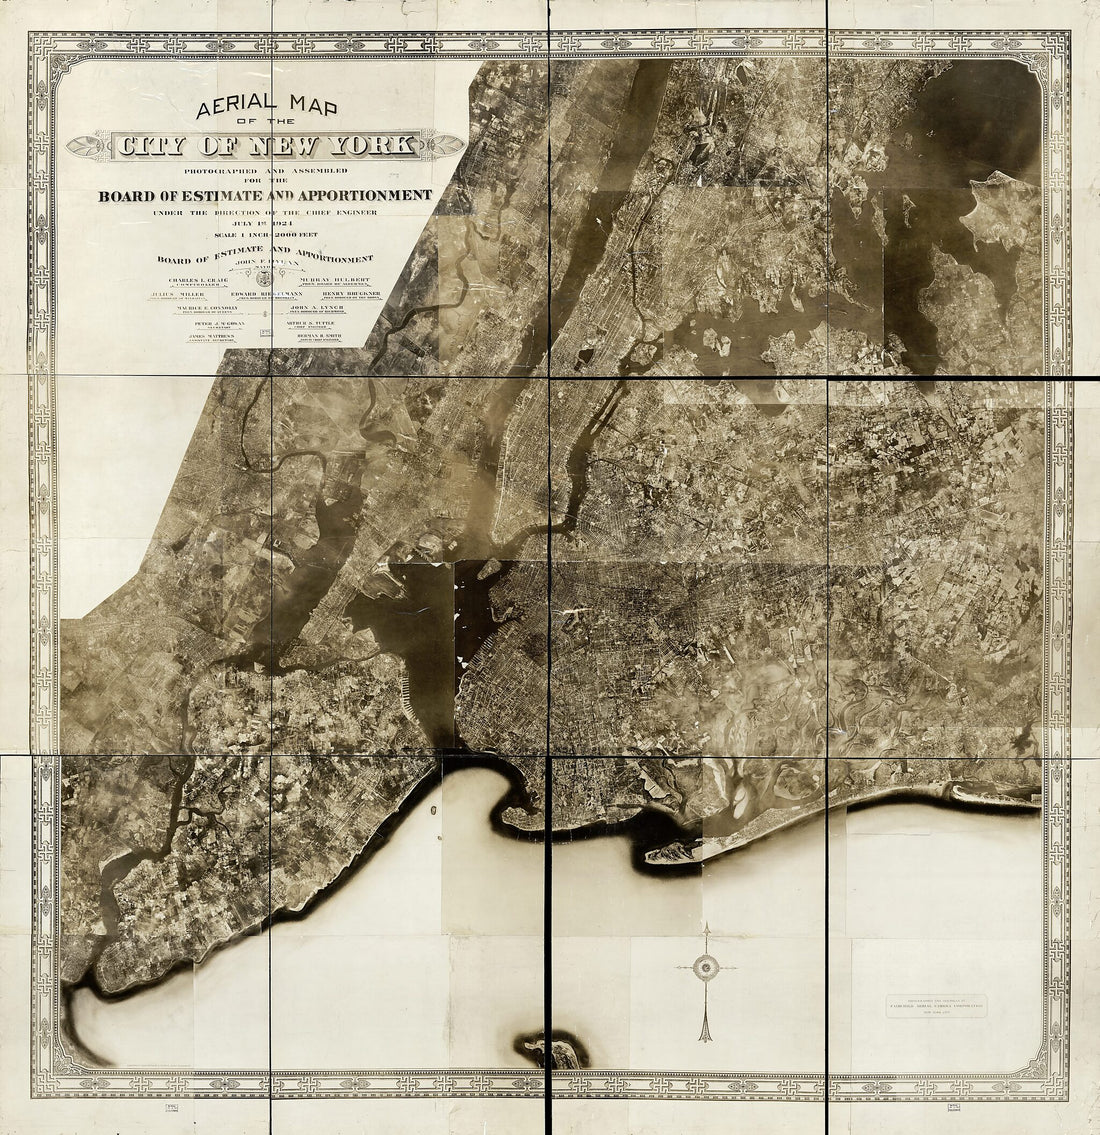 This old map of Aerial Map of the City of New York from 1924 was created by  Fairchild Aerial Camera Corporation,  New York (N.Y.). Board of Estimate and Apportionment,  New York (N.Y.). Chief Engineer, Arthur S. (Arthur Smith) Tuttle in 1924